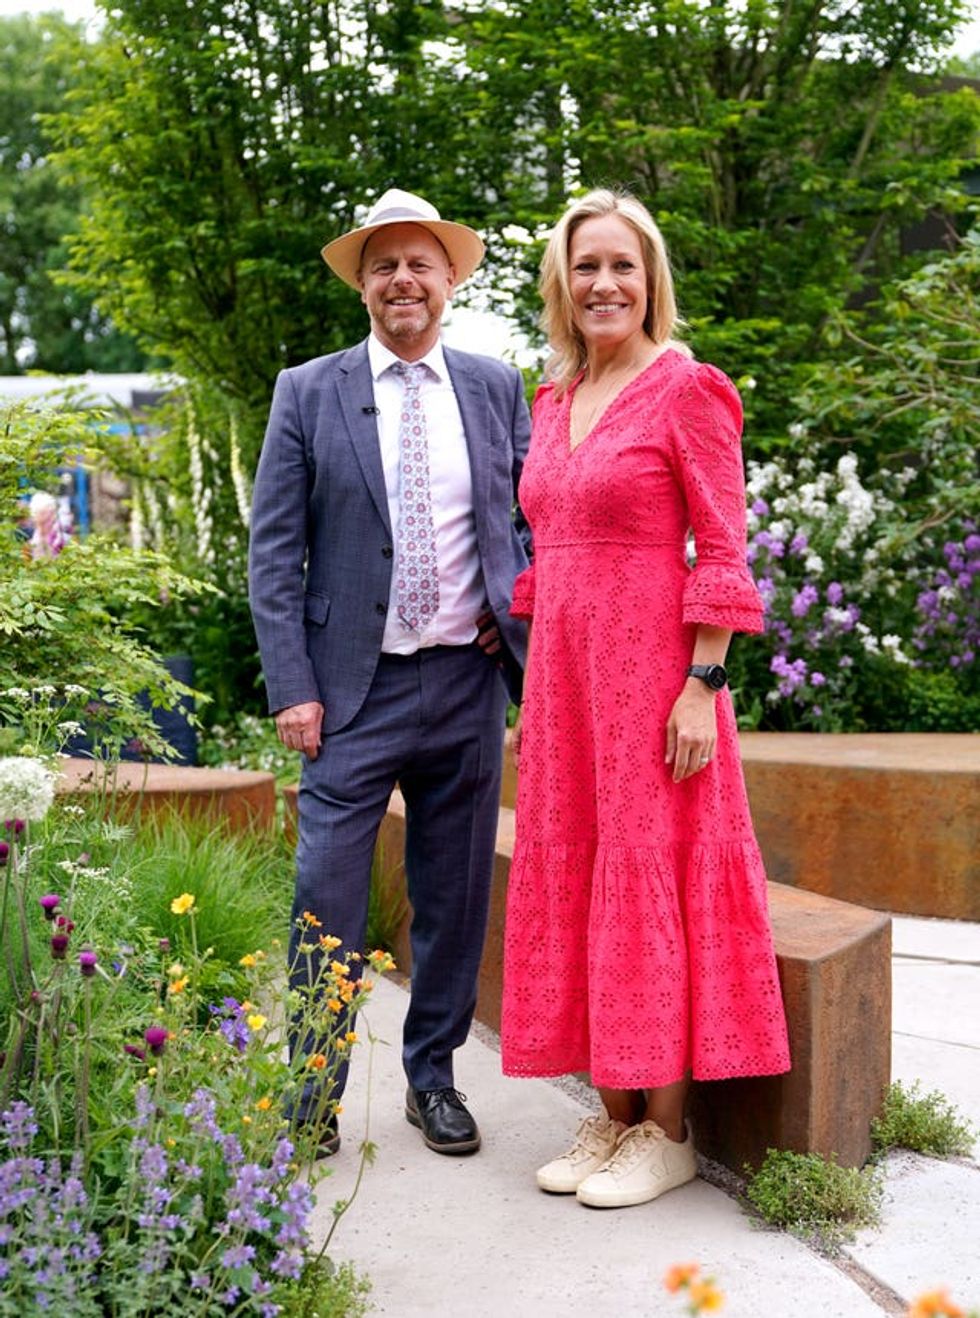 Garden designer Joe Swift with Sophie Raworth at the BBC Studios Our Green Planet & RHS Bee Garden during the RHS Chelsea Flower Show press day at the Royal Hospital Chelsea, London